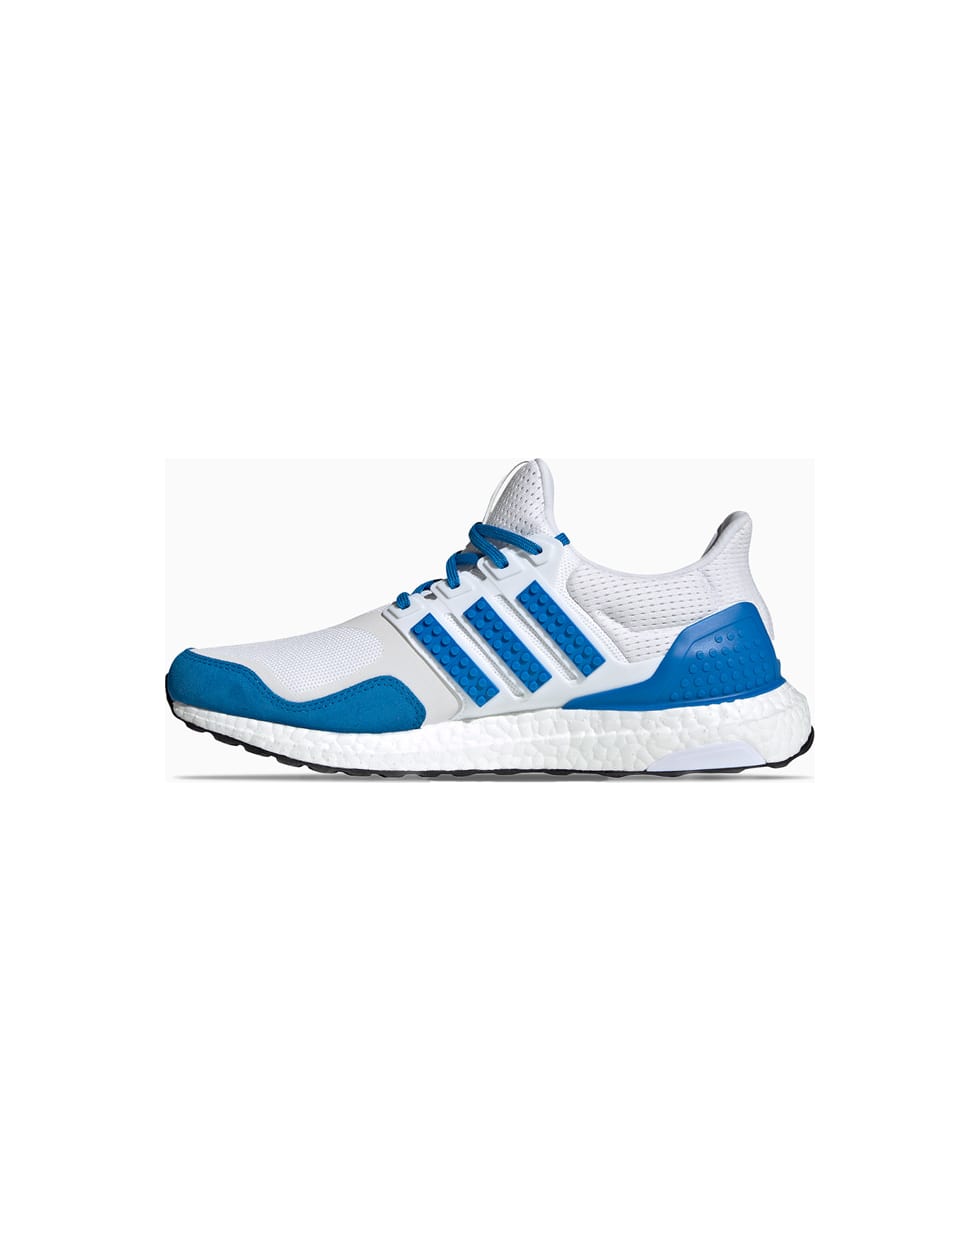 Adidas Ultraboost Dna X Lego H67952 Sneakers - WHITE